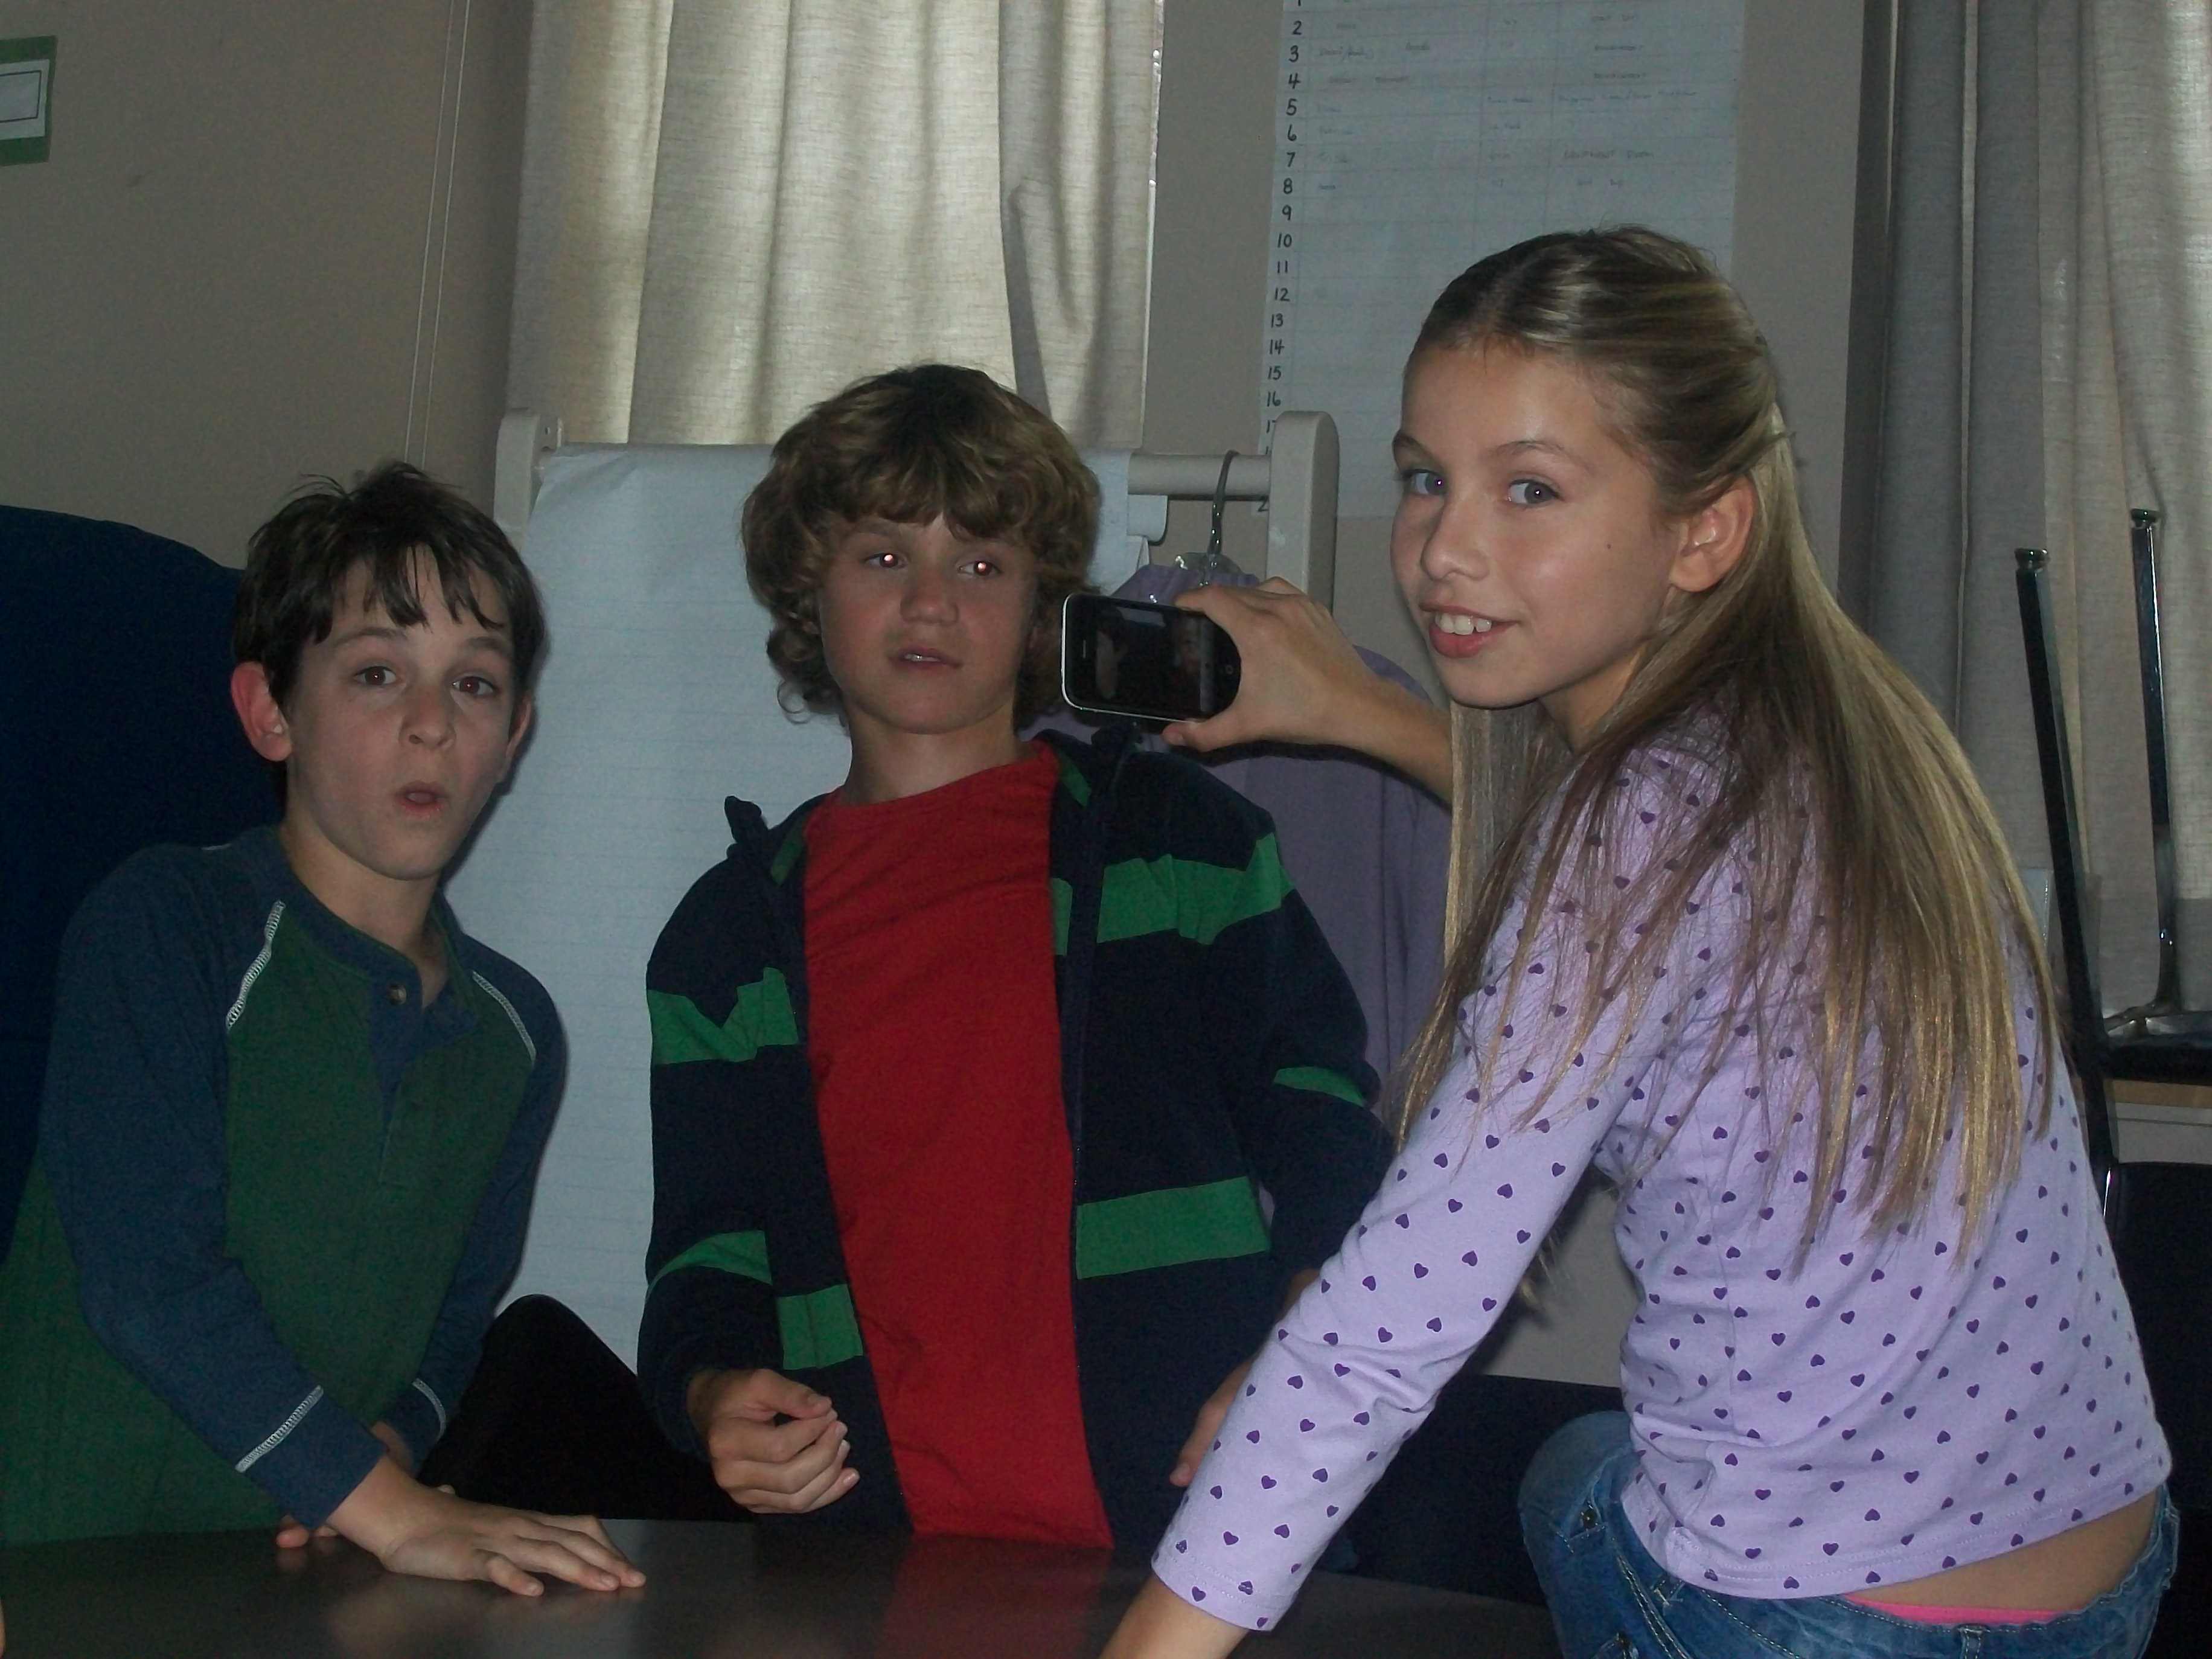 Zachary Gordon (Greg), Owen Best (Bryce Anderson), and the popular Samantha Page (Shelley) all stars from the hit film Diary of a Wimpy Kid.